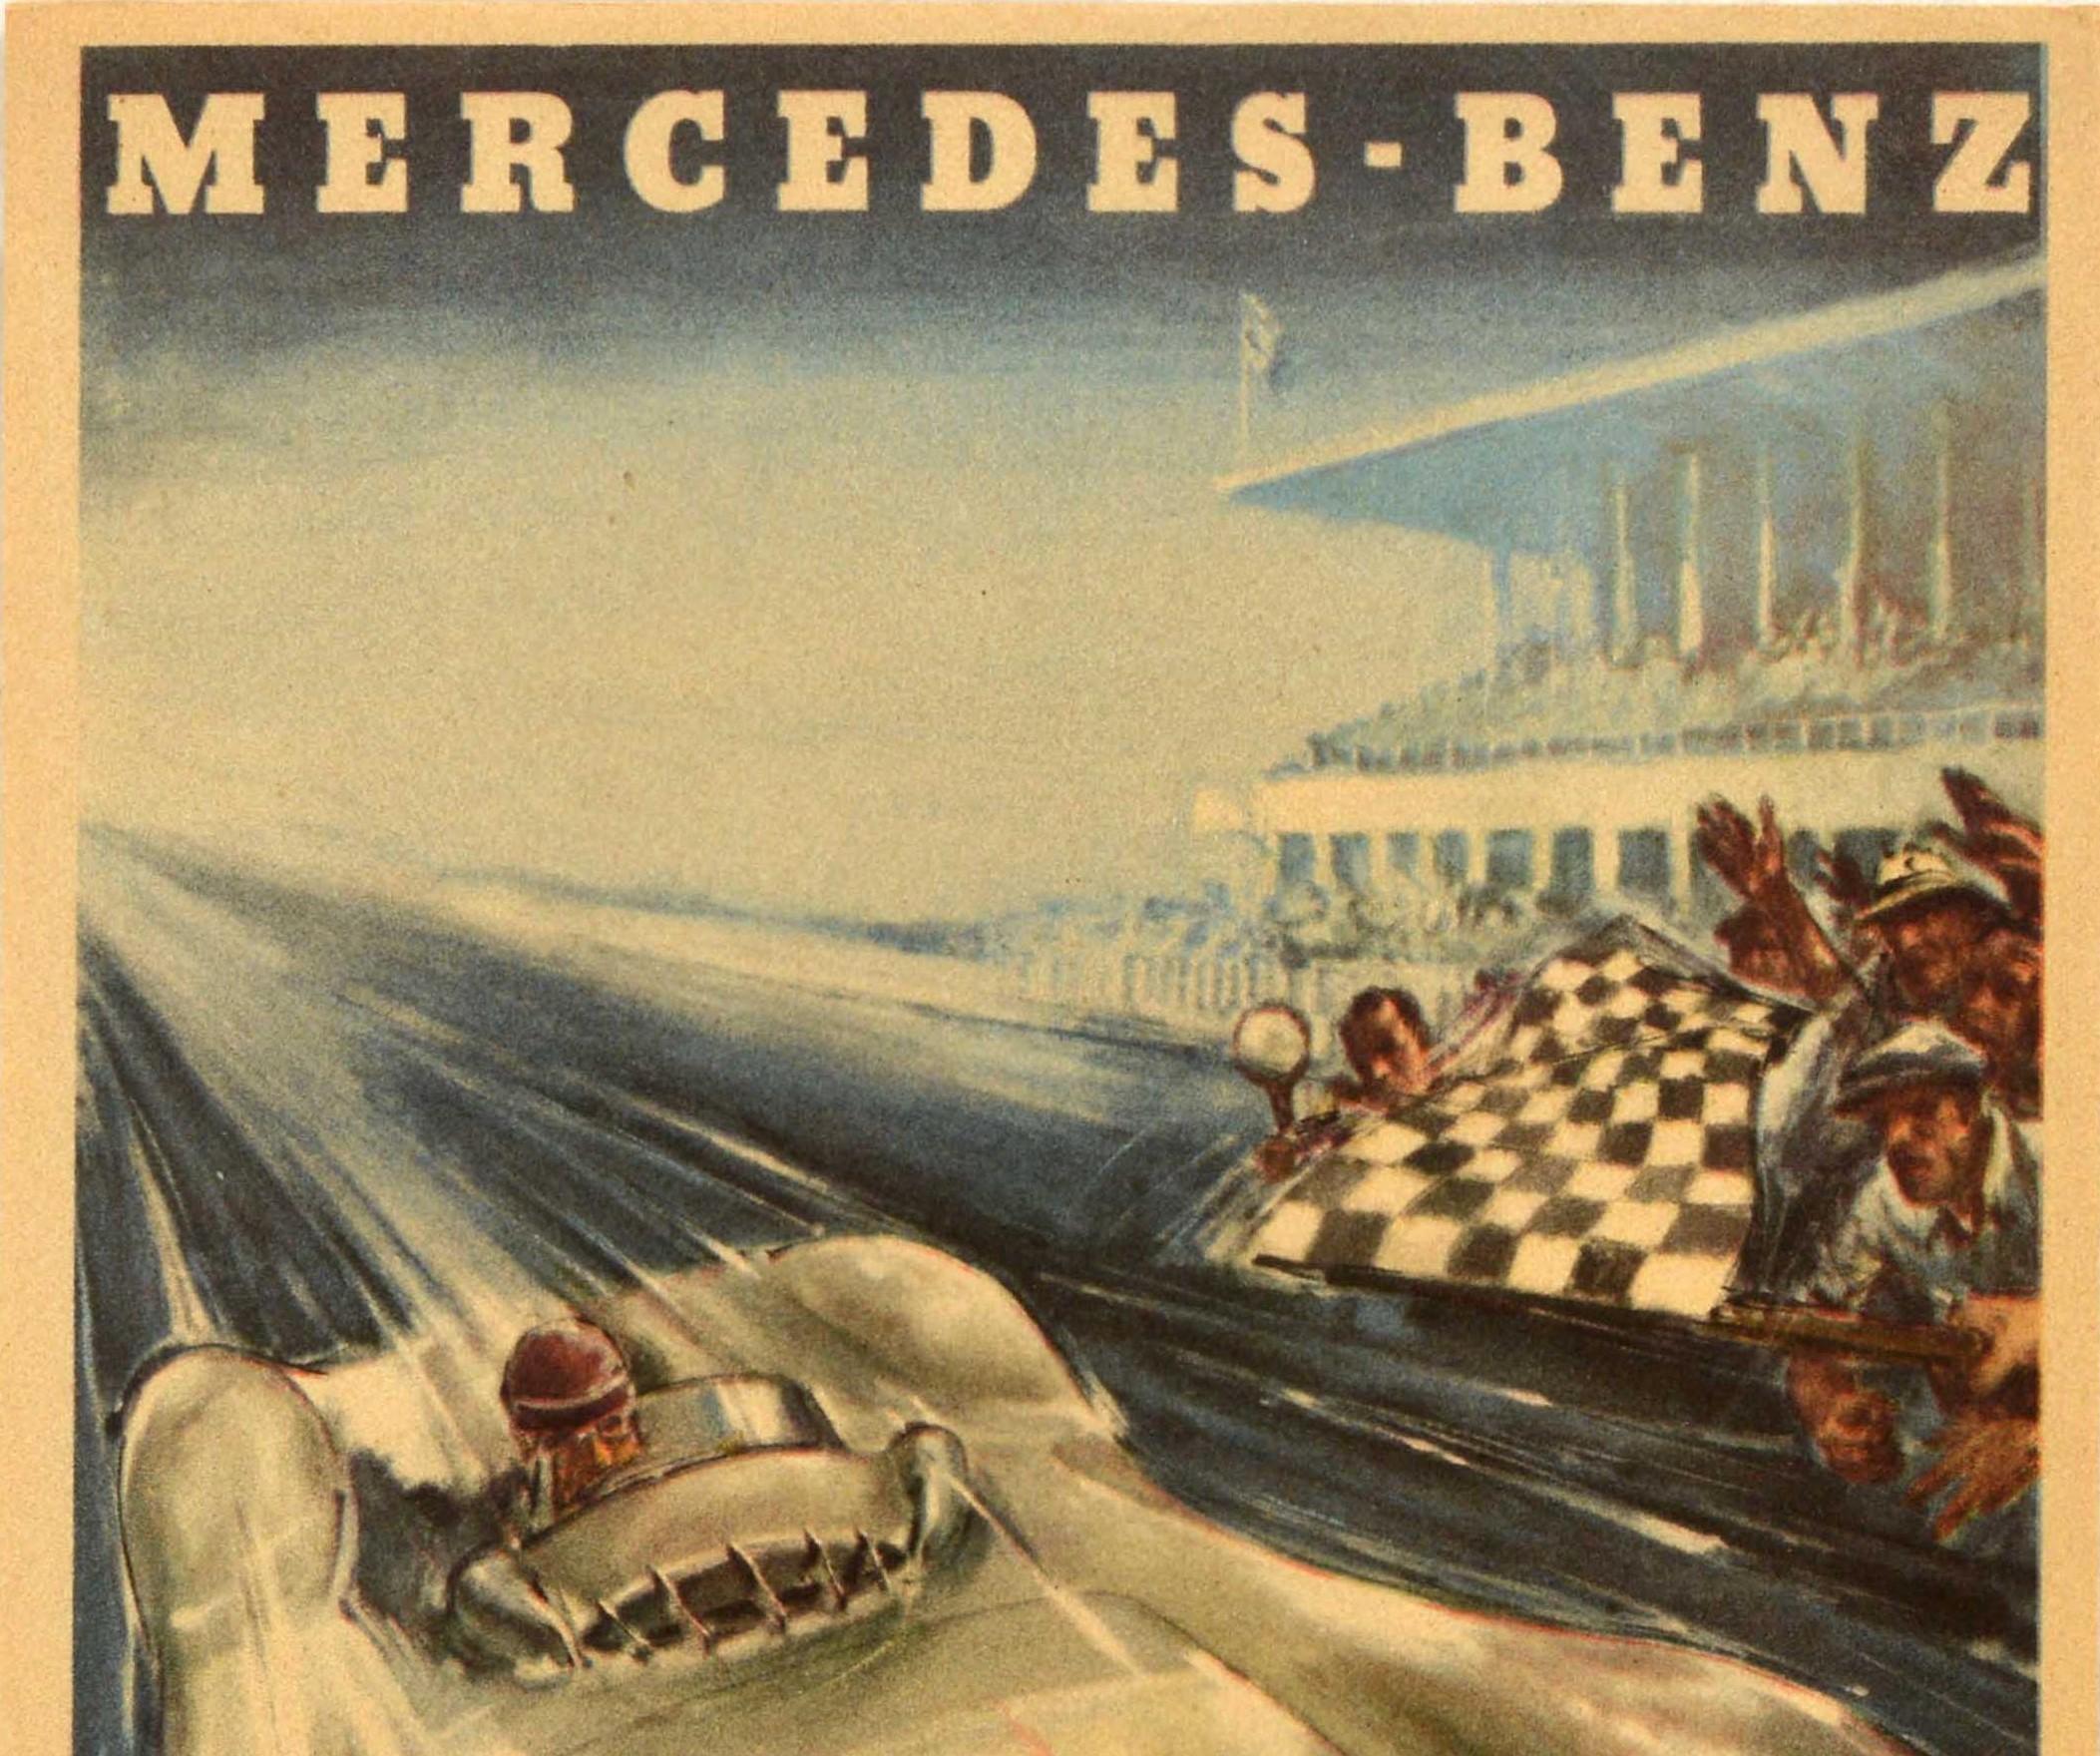 Original vintage motor sport poster for Mercedes-Benz featuring great artwork by the notable Austrian graphic designer, painter and artist Hans Liska (1907-1983) depicting the German racing driver Karl Kling (1910-2003) driving his Mercedes W196 car